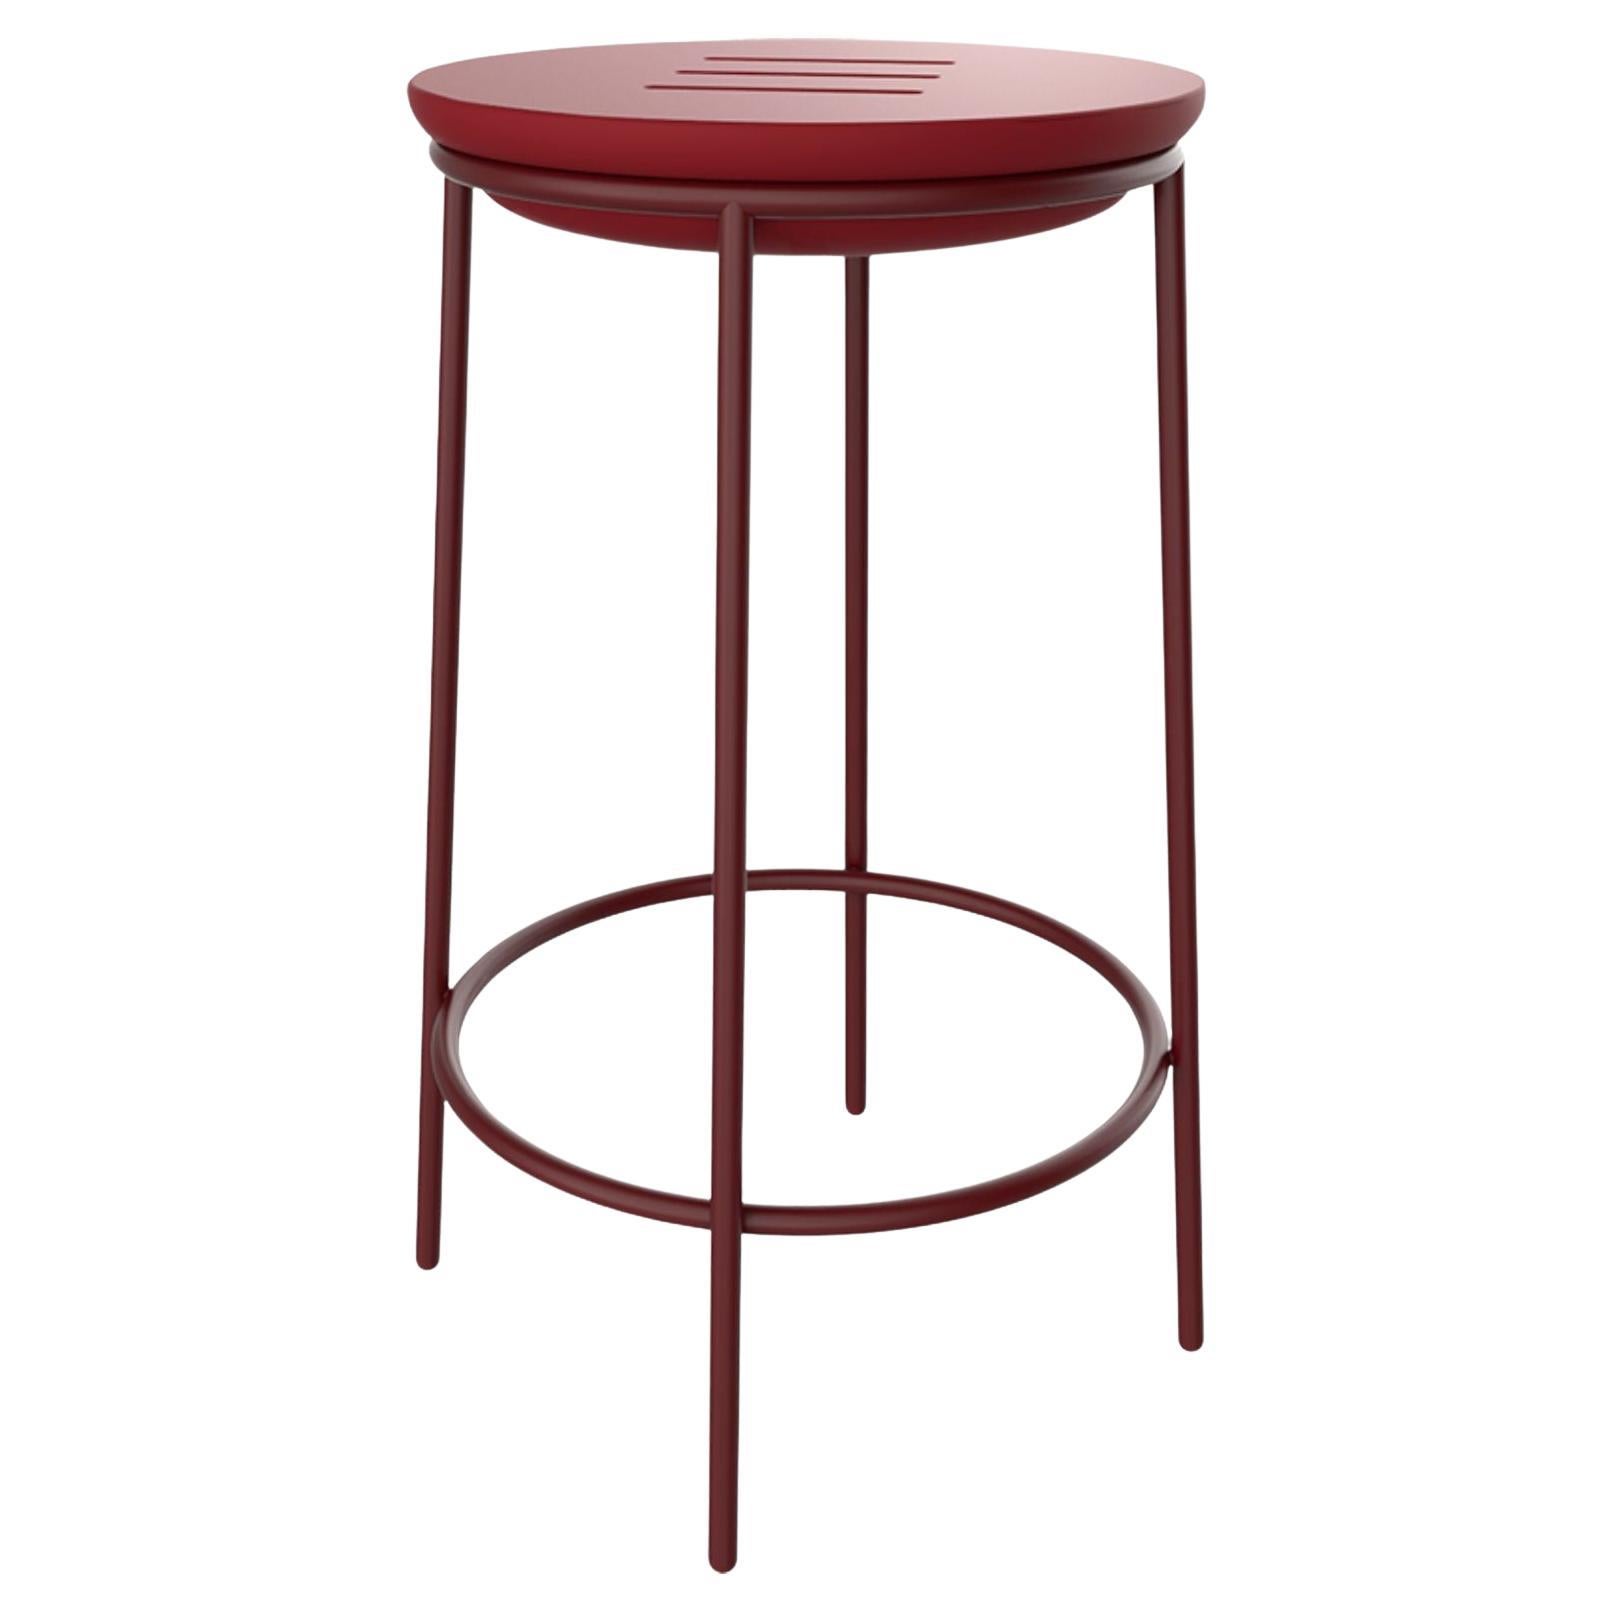 Lace Burgundy 60 High Table by Mowee For Sale